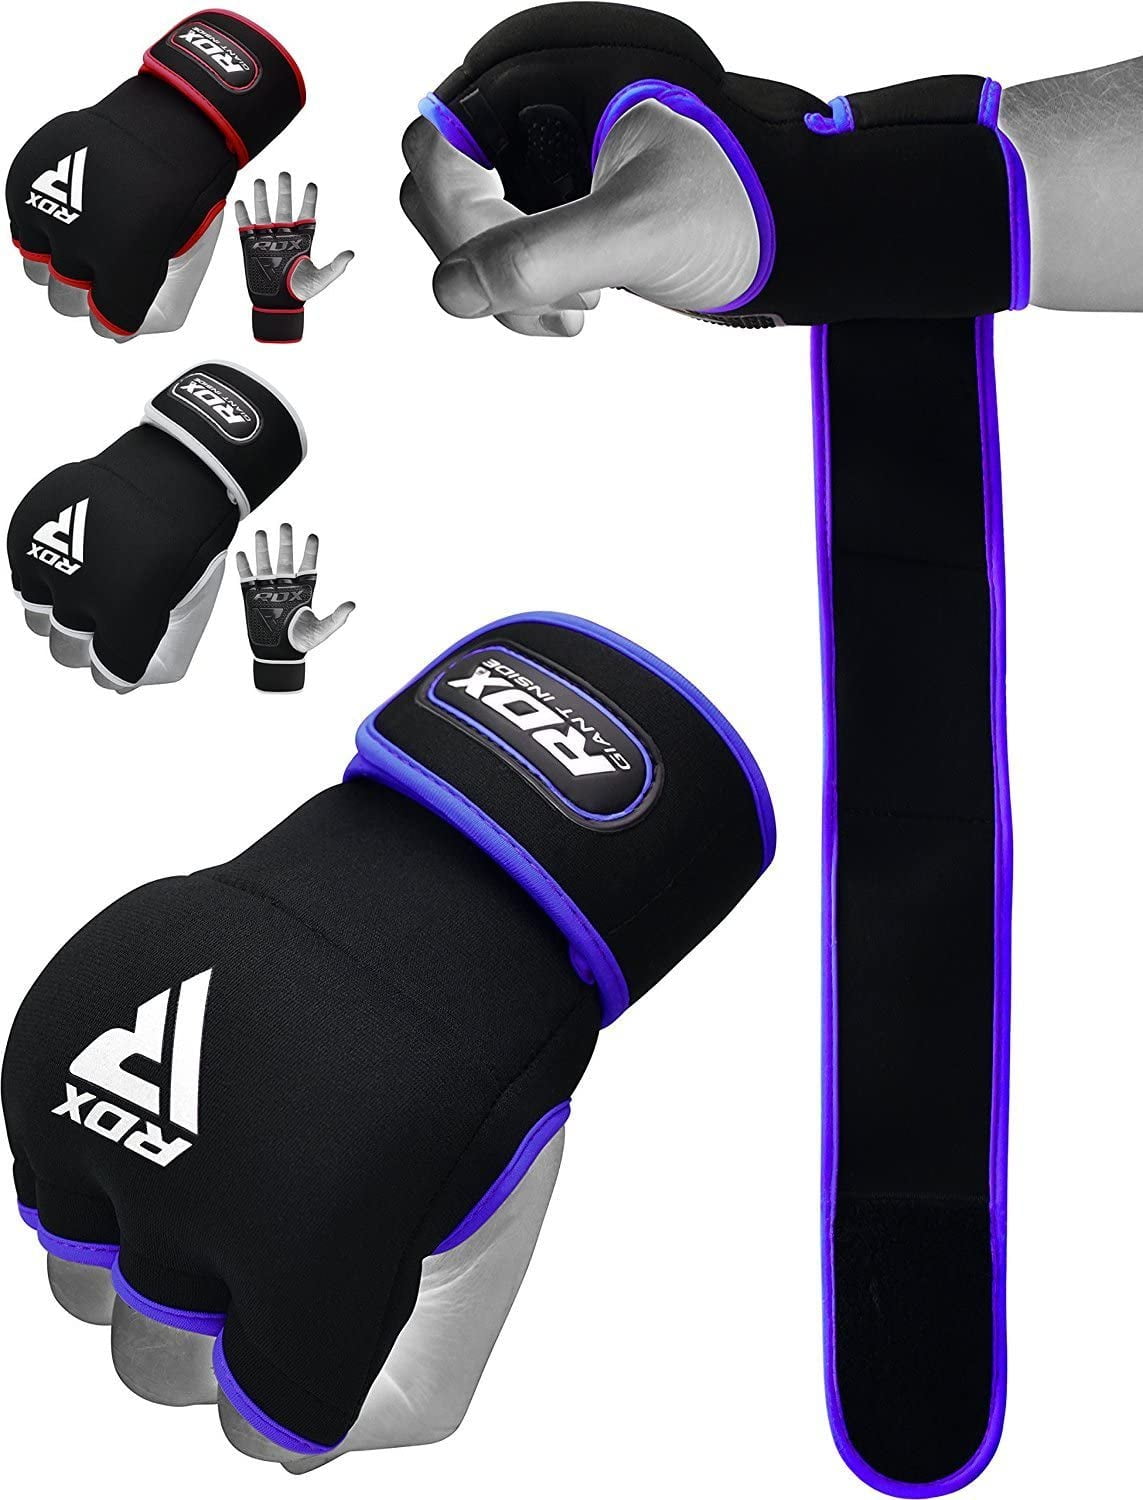 Gel Gloves Boxing Padded Inner Punch Bag Hand Quick Wraps UFC Gear MMA Protector 